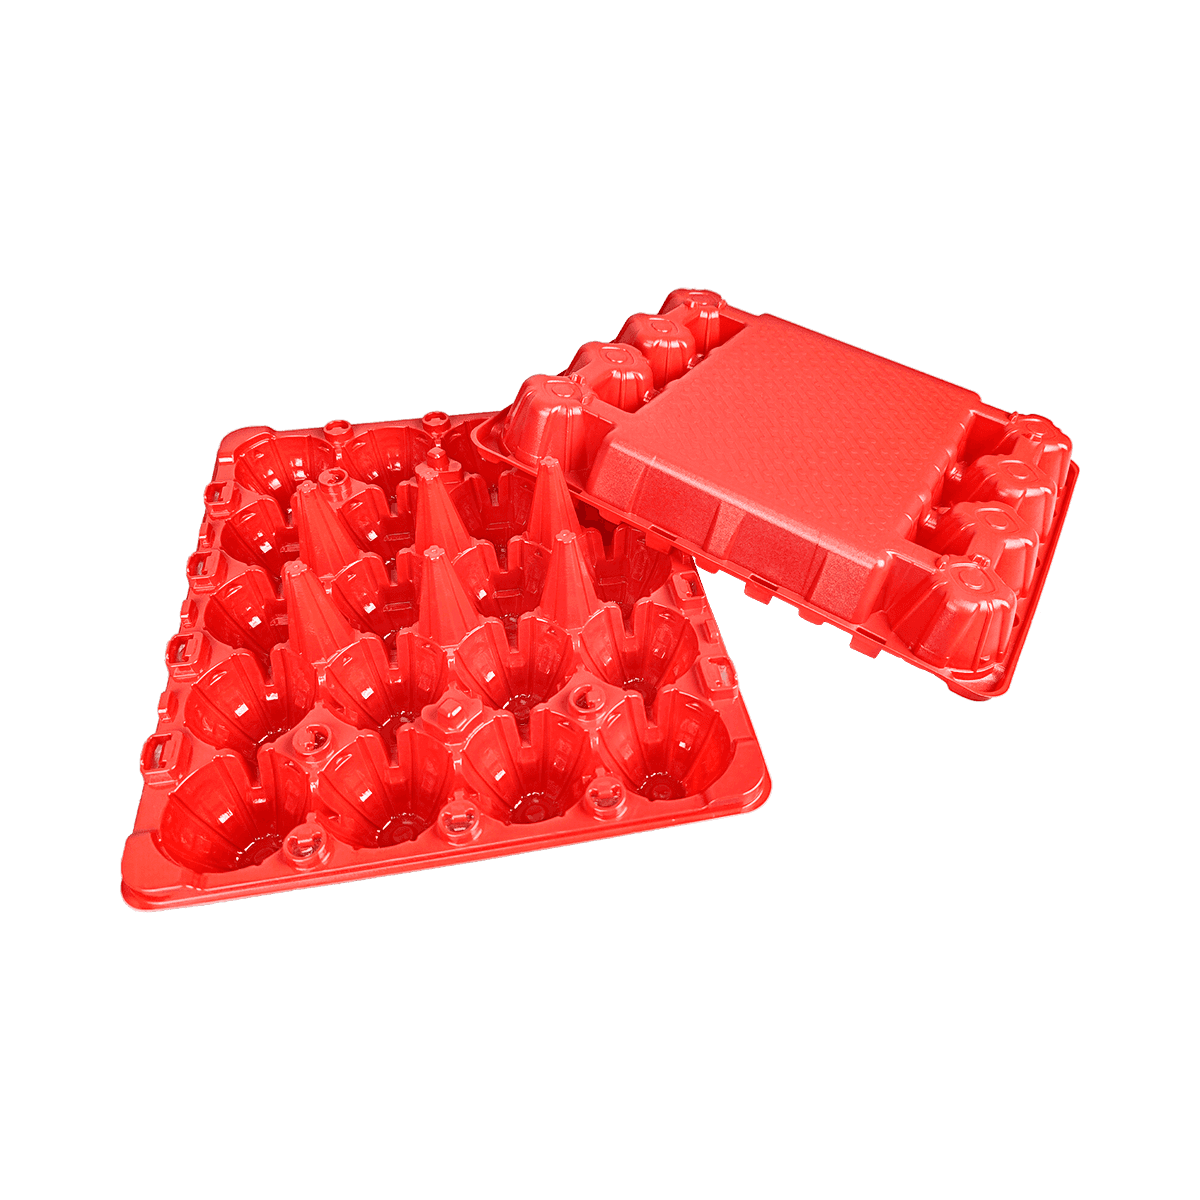 Reusable Matte Red PET 20 Egg Cartons Suitable For Home Pasture Chicken Farms, Commercial Market Displays